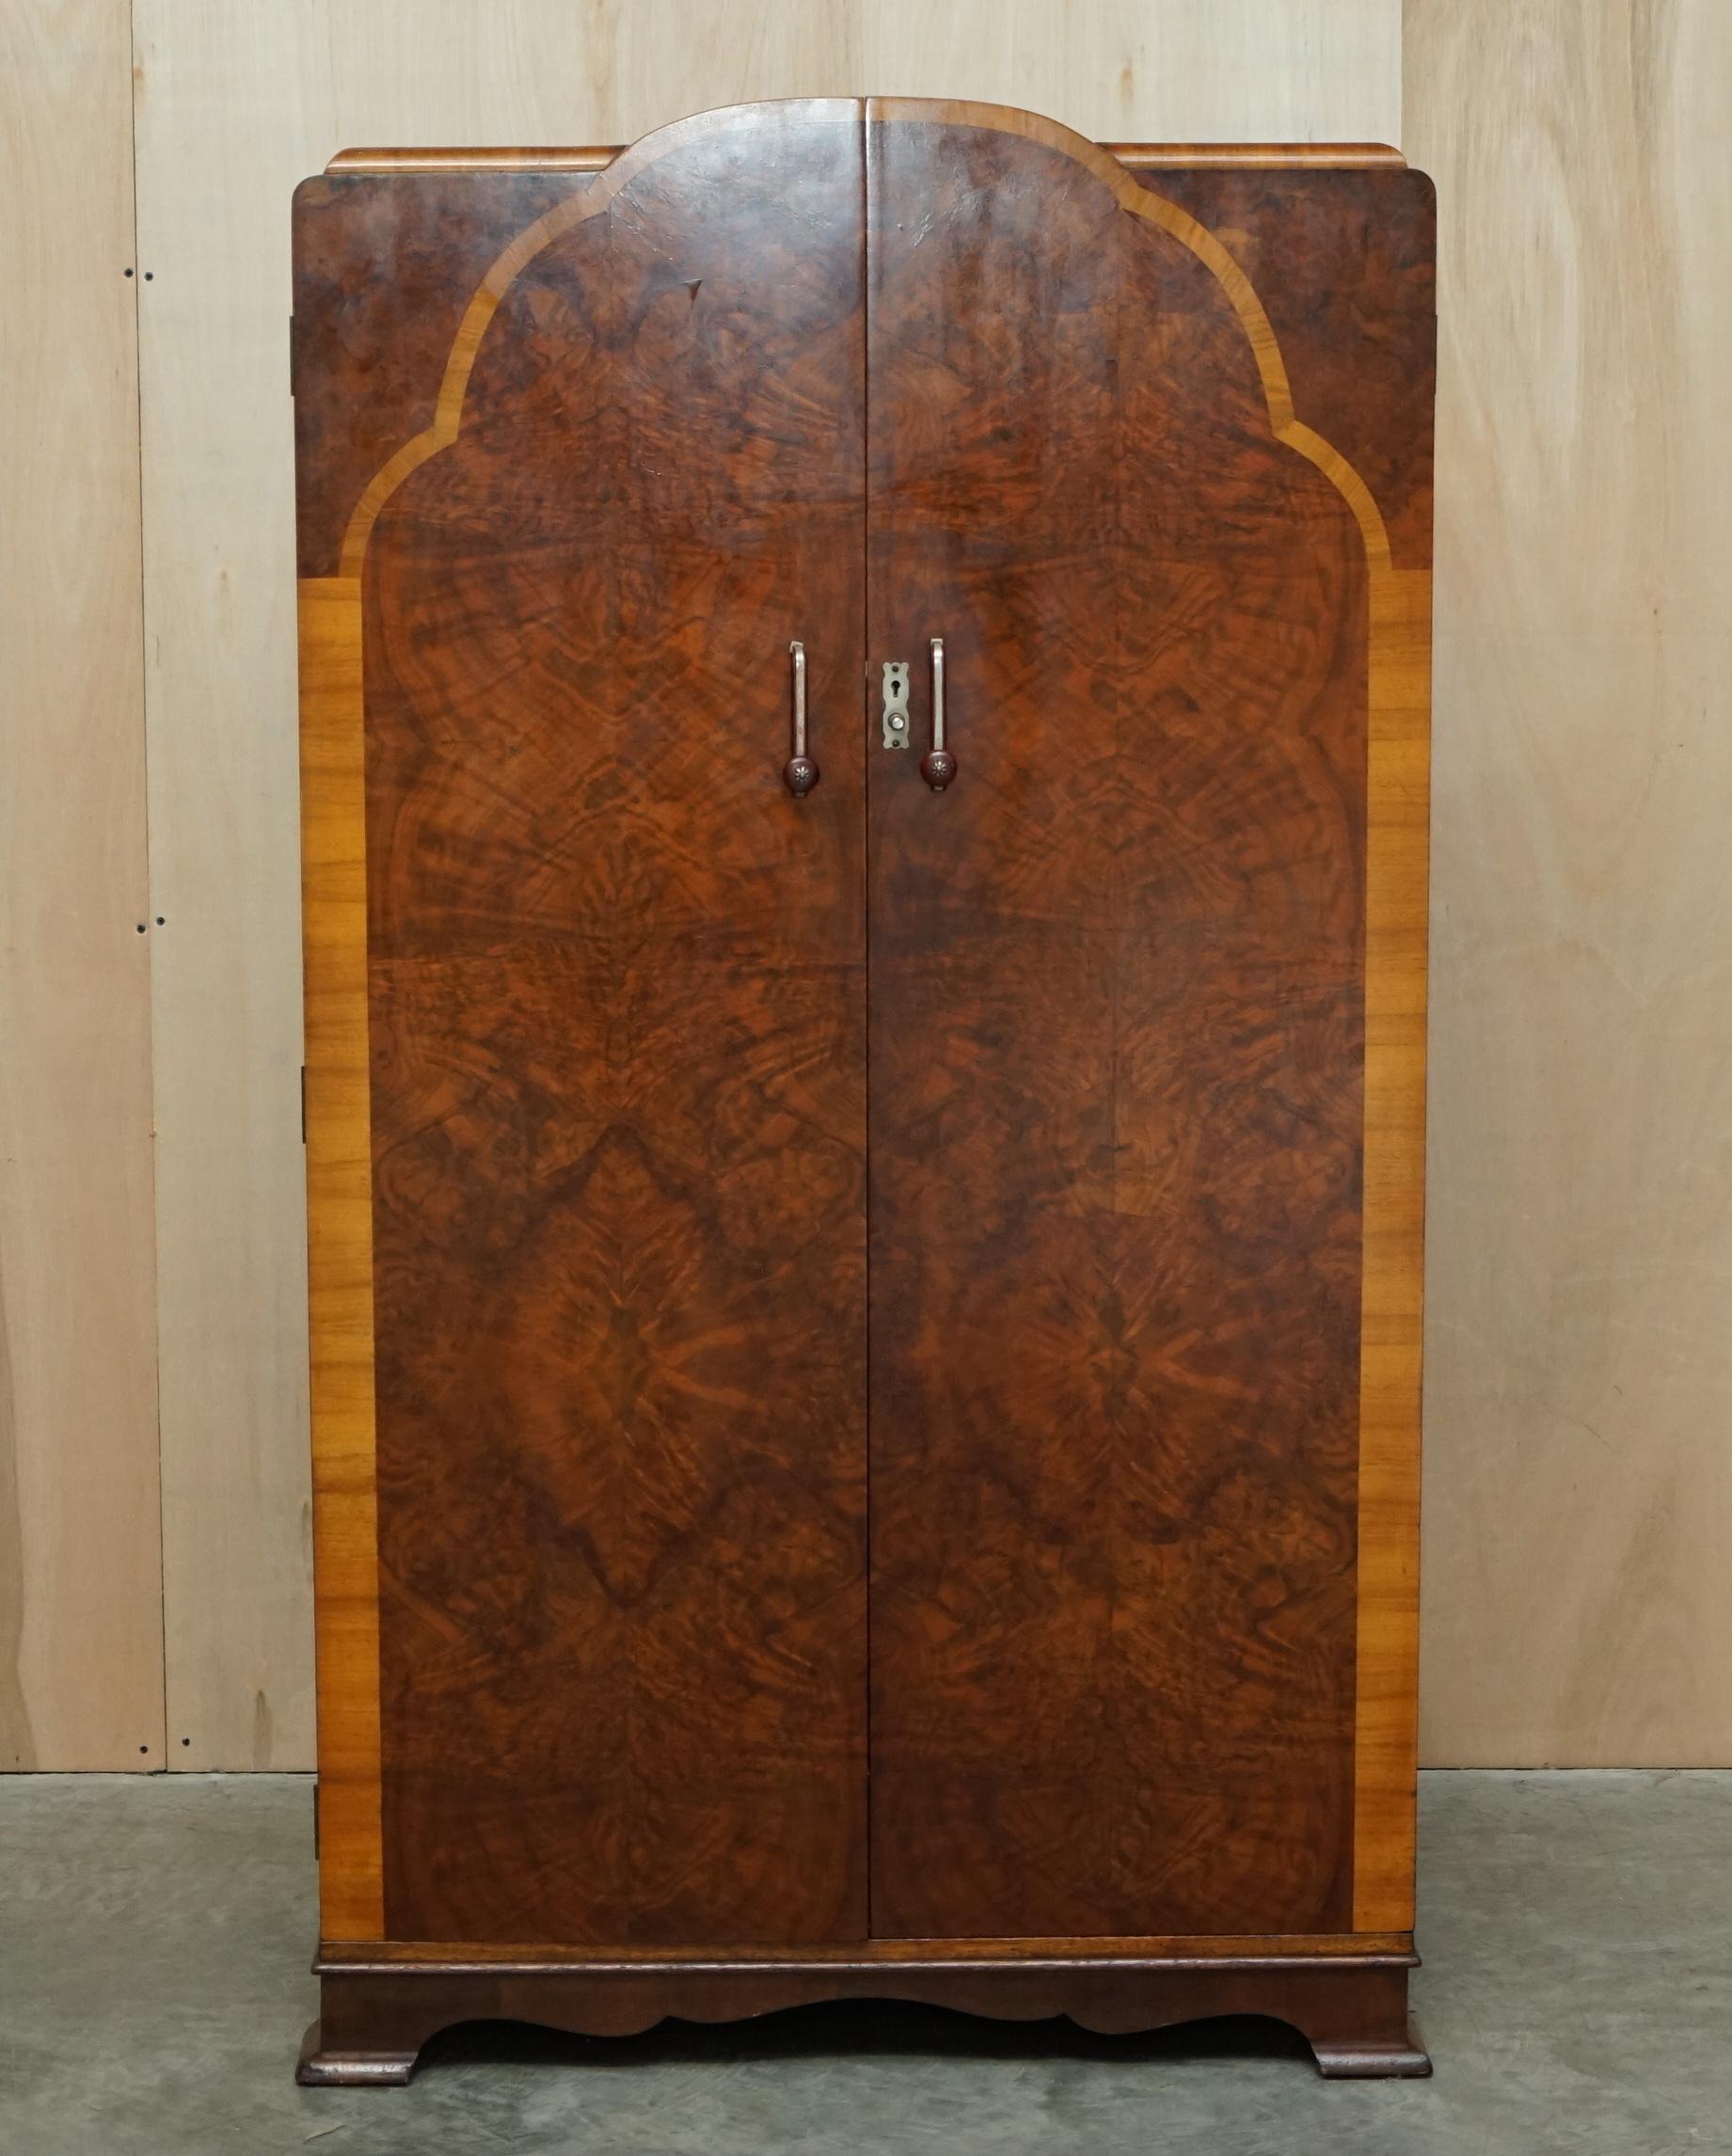 We are delighted to offer for sale this stunning, original circa 1920’s Art Deco small Wardrobe which is part of a suite

As mentioned this piece is part of a suite, in total I have a his and hers pair of wardrobes, the dressing table, one single